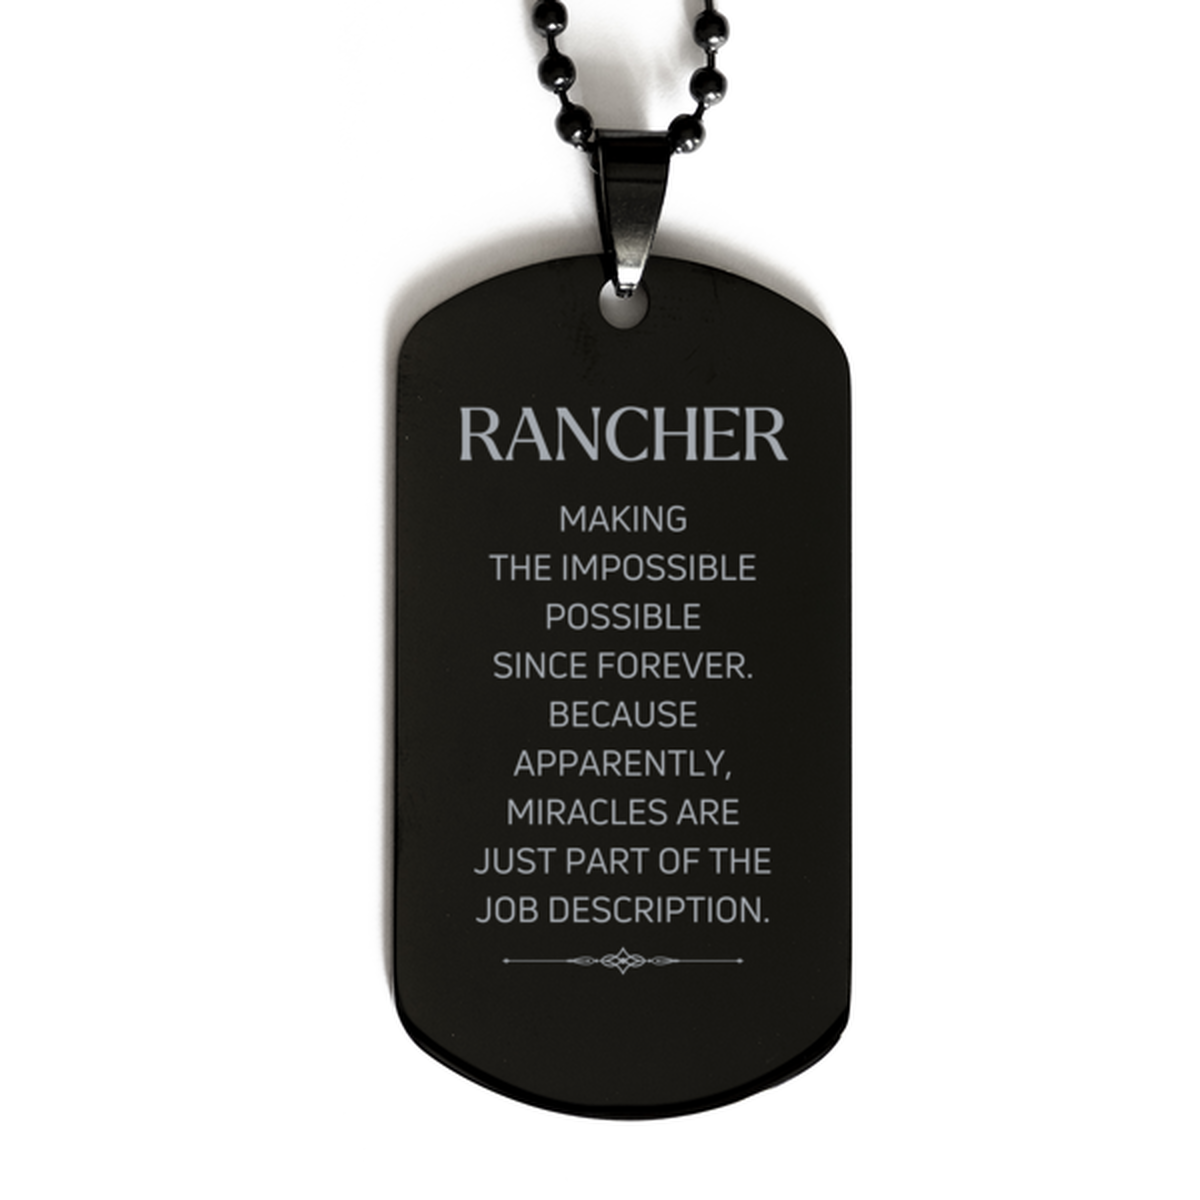 Funny Rancher Gifts, Miracles are just part of the job description, Inspirational Birthday Black Dog Tag For Rancher, Men, Women, Coworkers, Friends, Boss